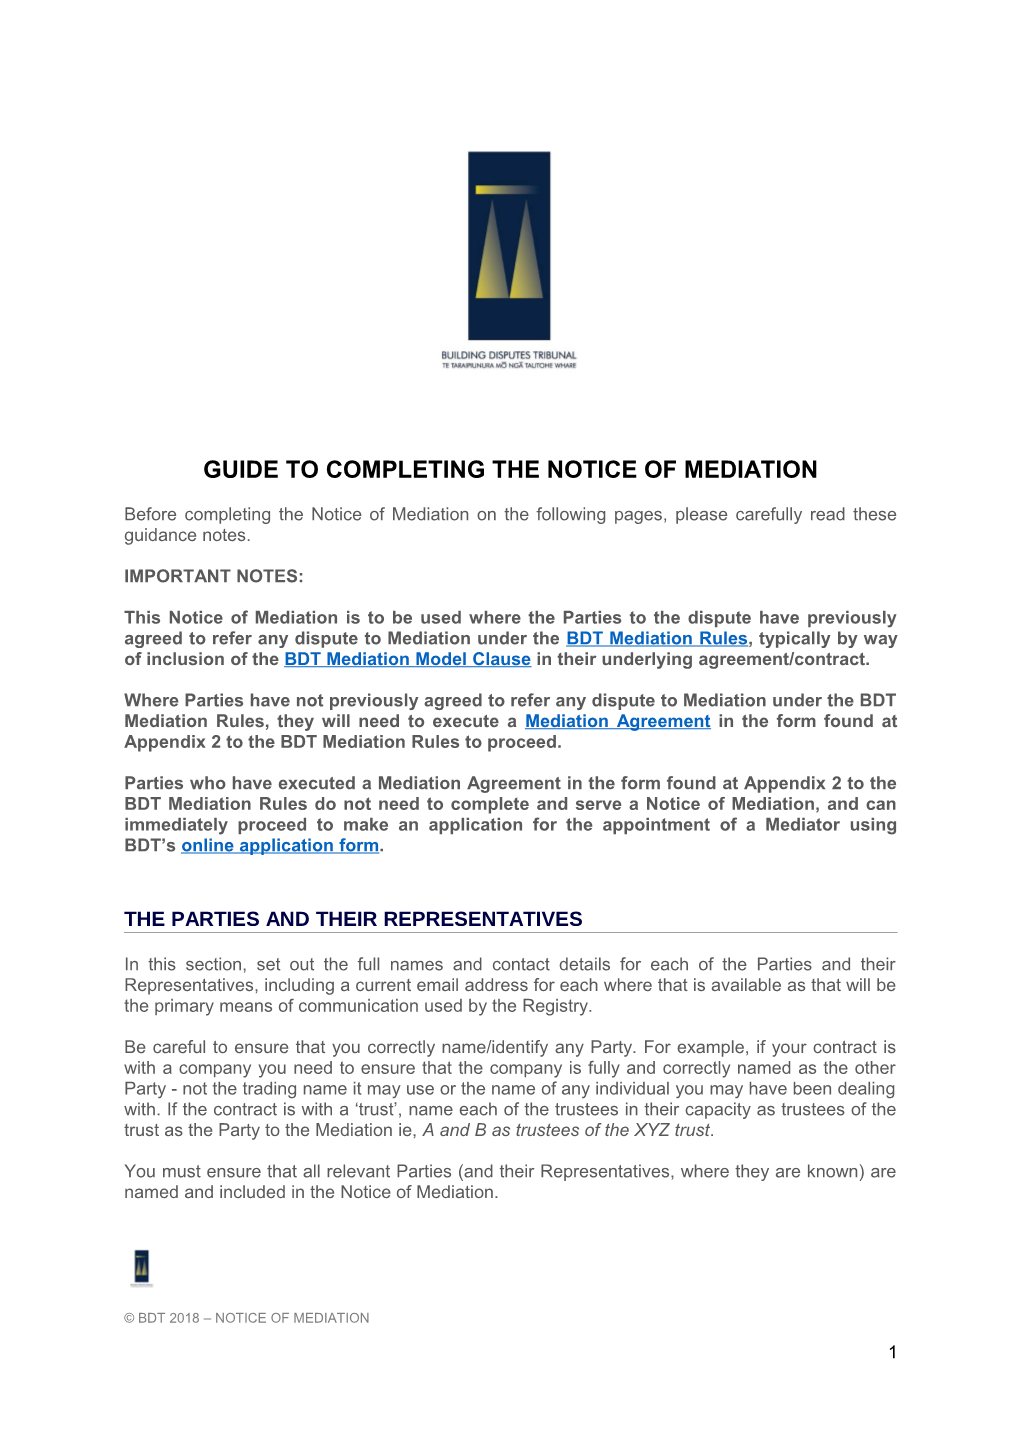 Guide to Completing the Notice of Mediation